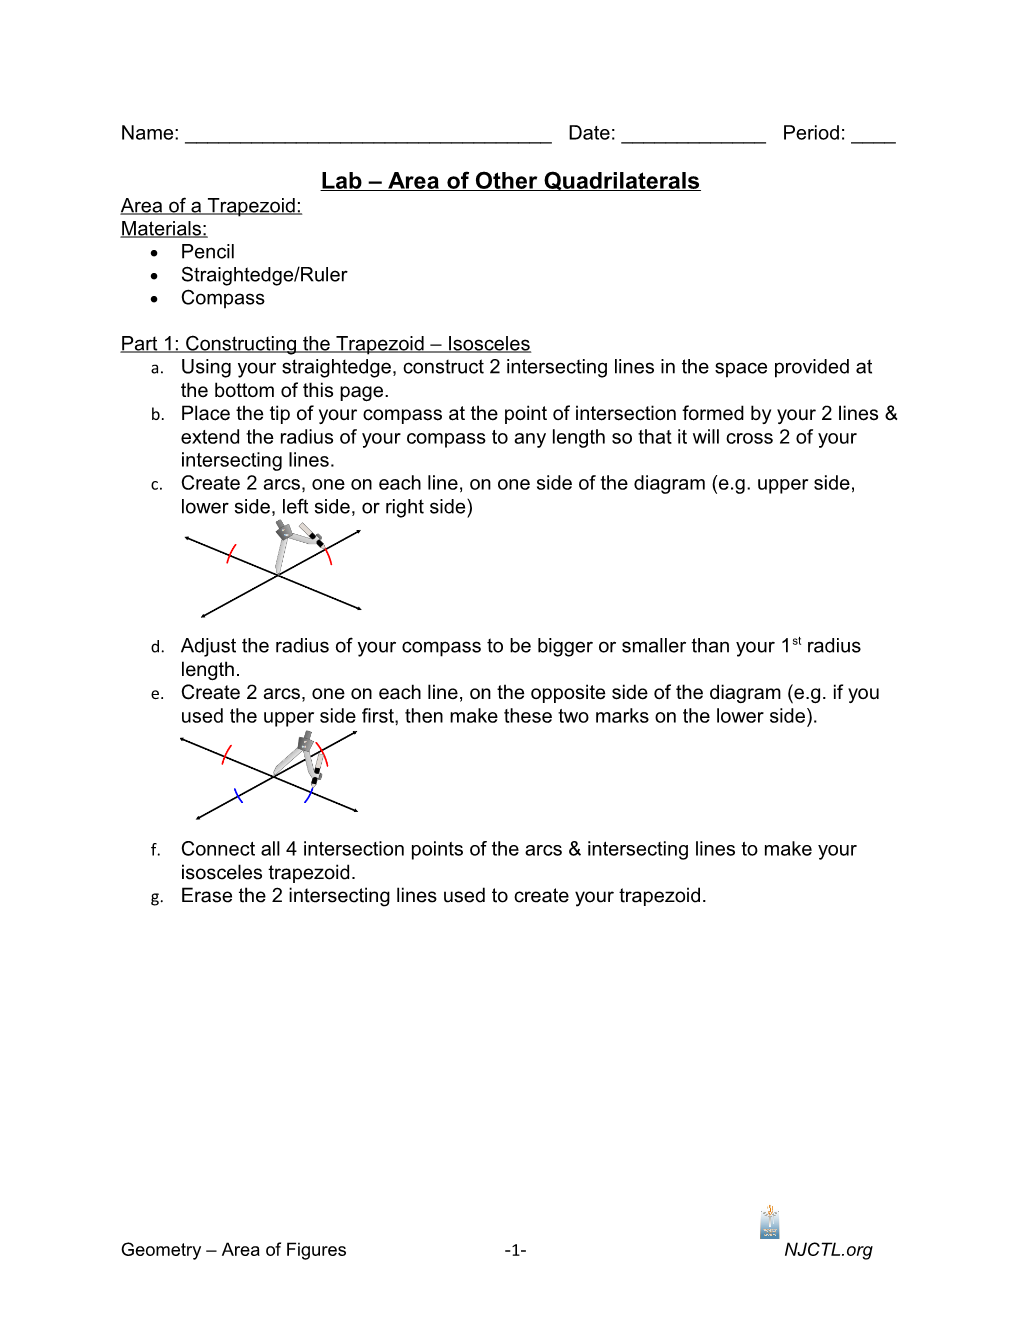 Lab Area of Other Quadrilaterals